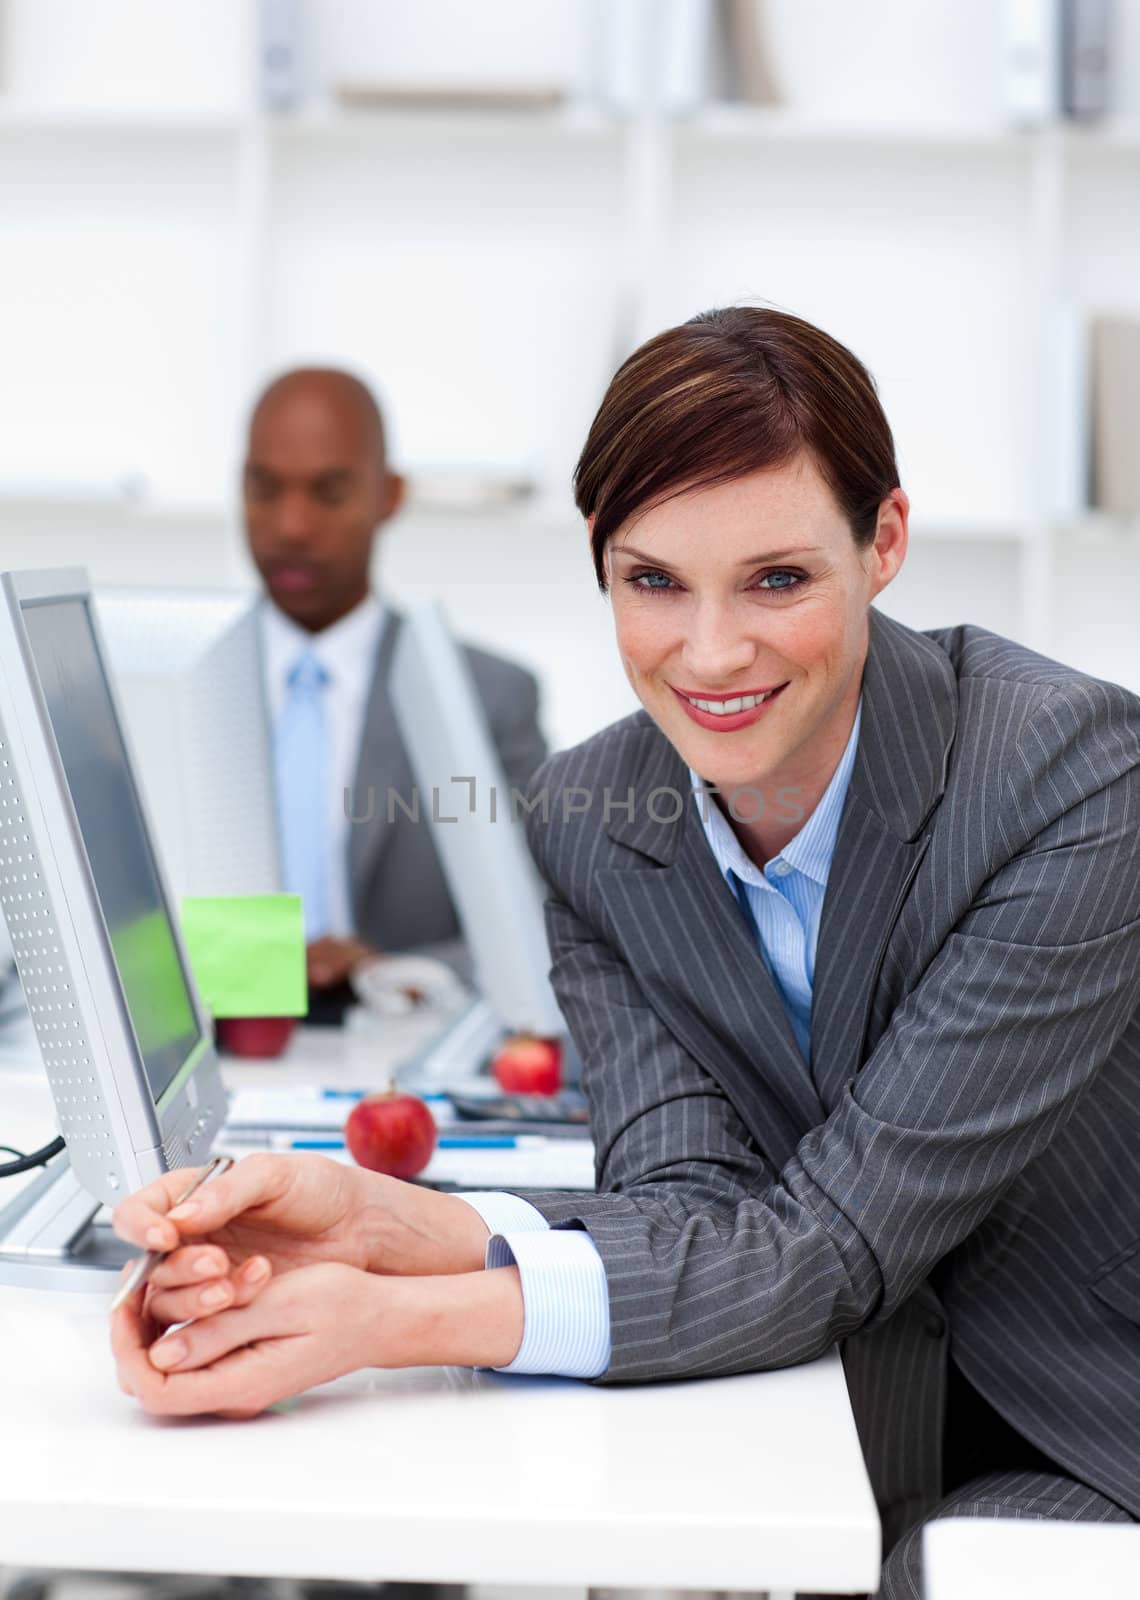 Smiling businesswoman at work with her colleague in the backgrou by Wavebreakmedia